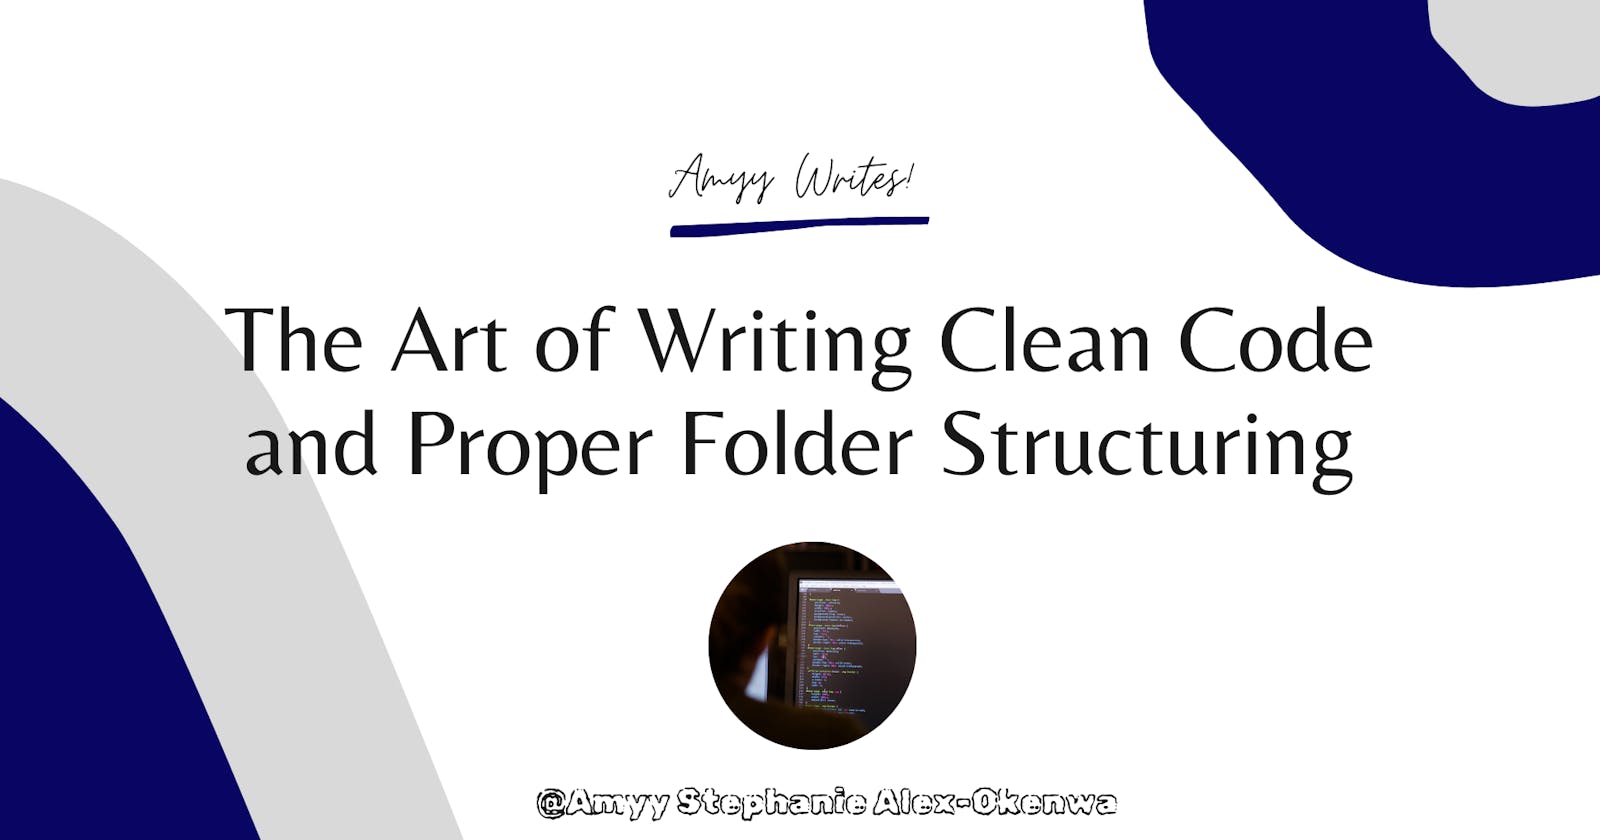 The Art of Writing Clean Code and Proper Folder Structuring.